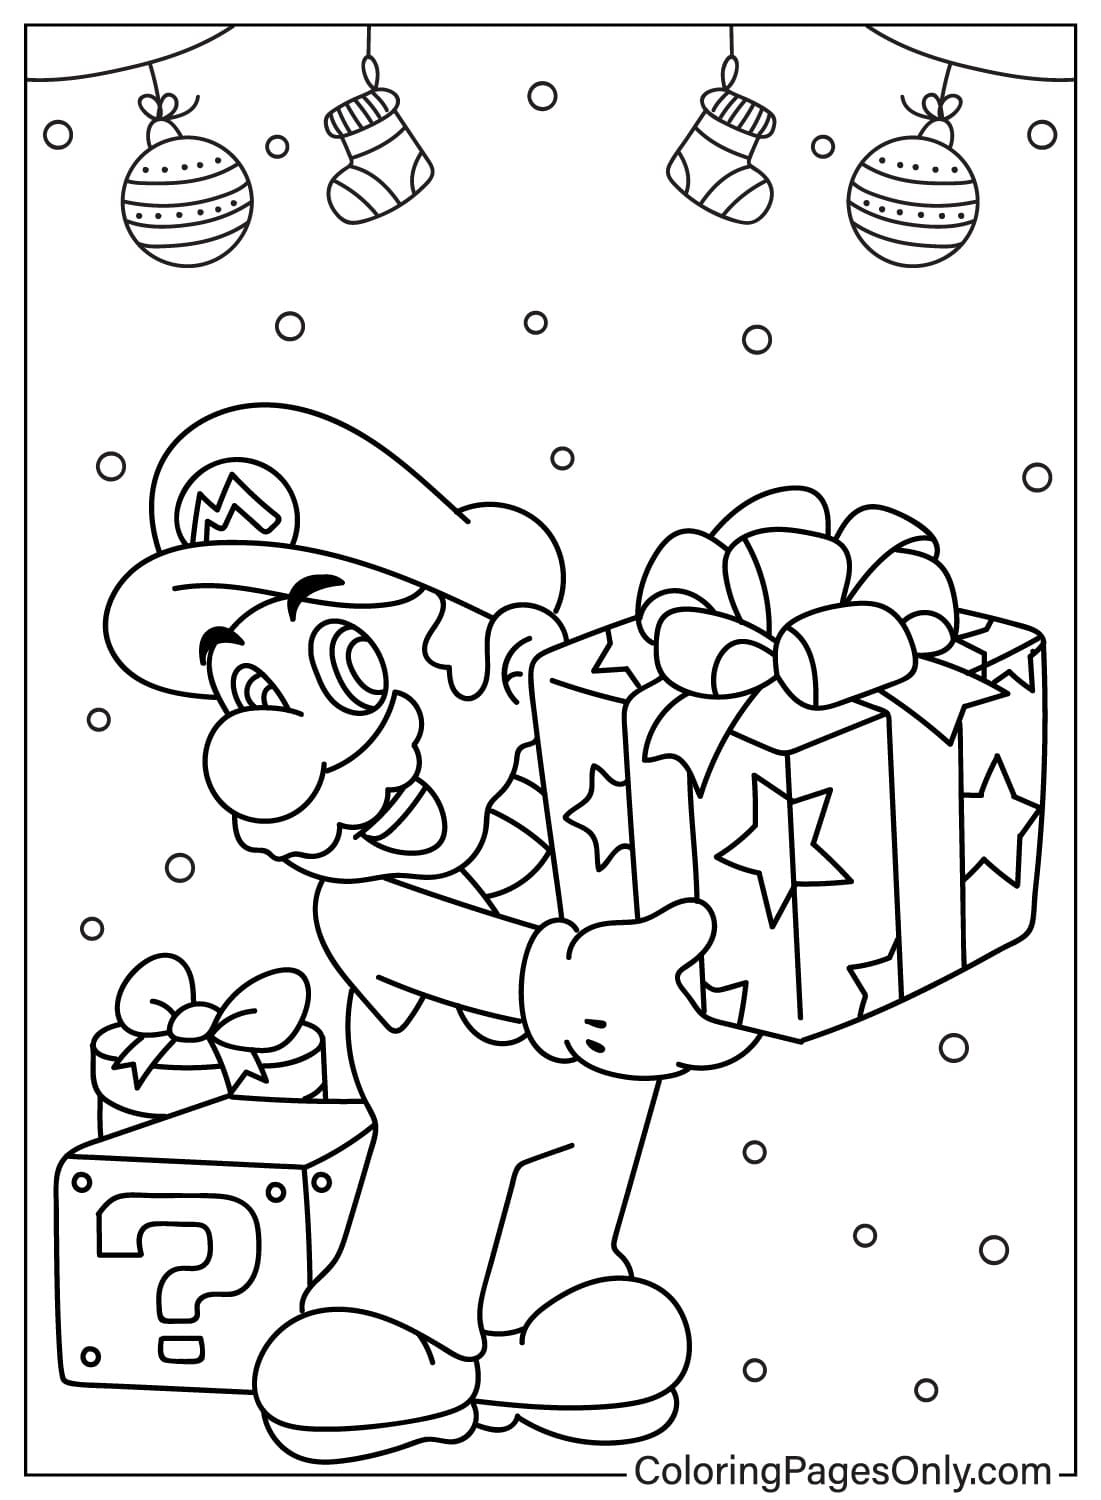 Mario Christmas Coloring Page from Mario